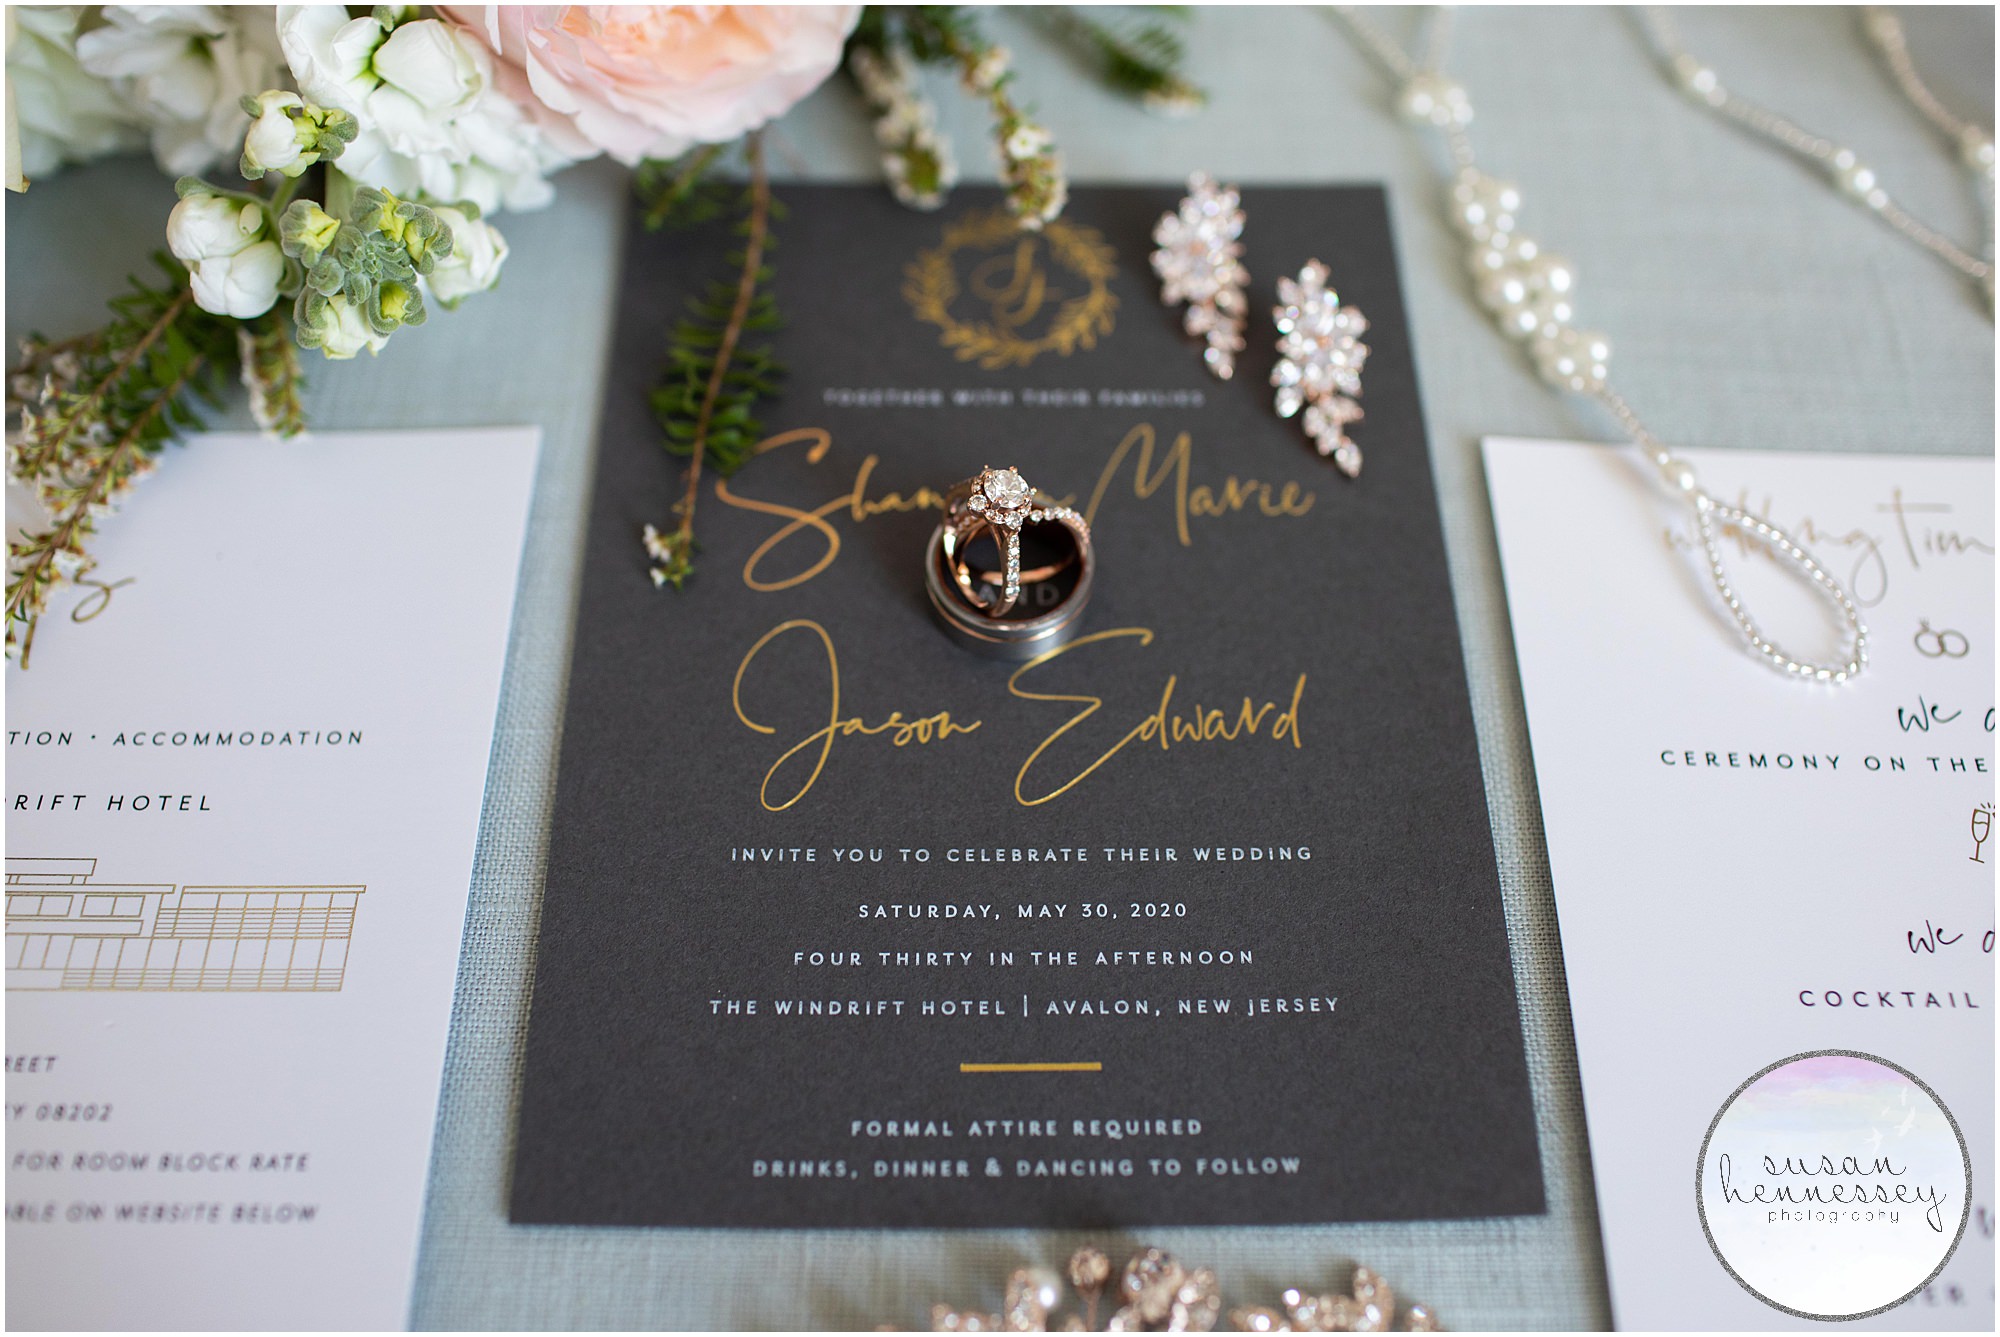 Invitation suite for a May 30th wedding that was postponed due to COVID-19